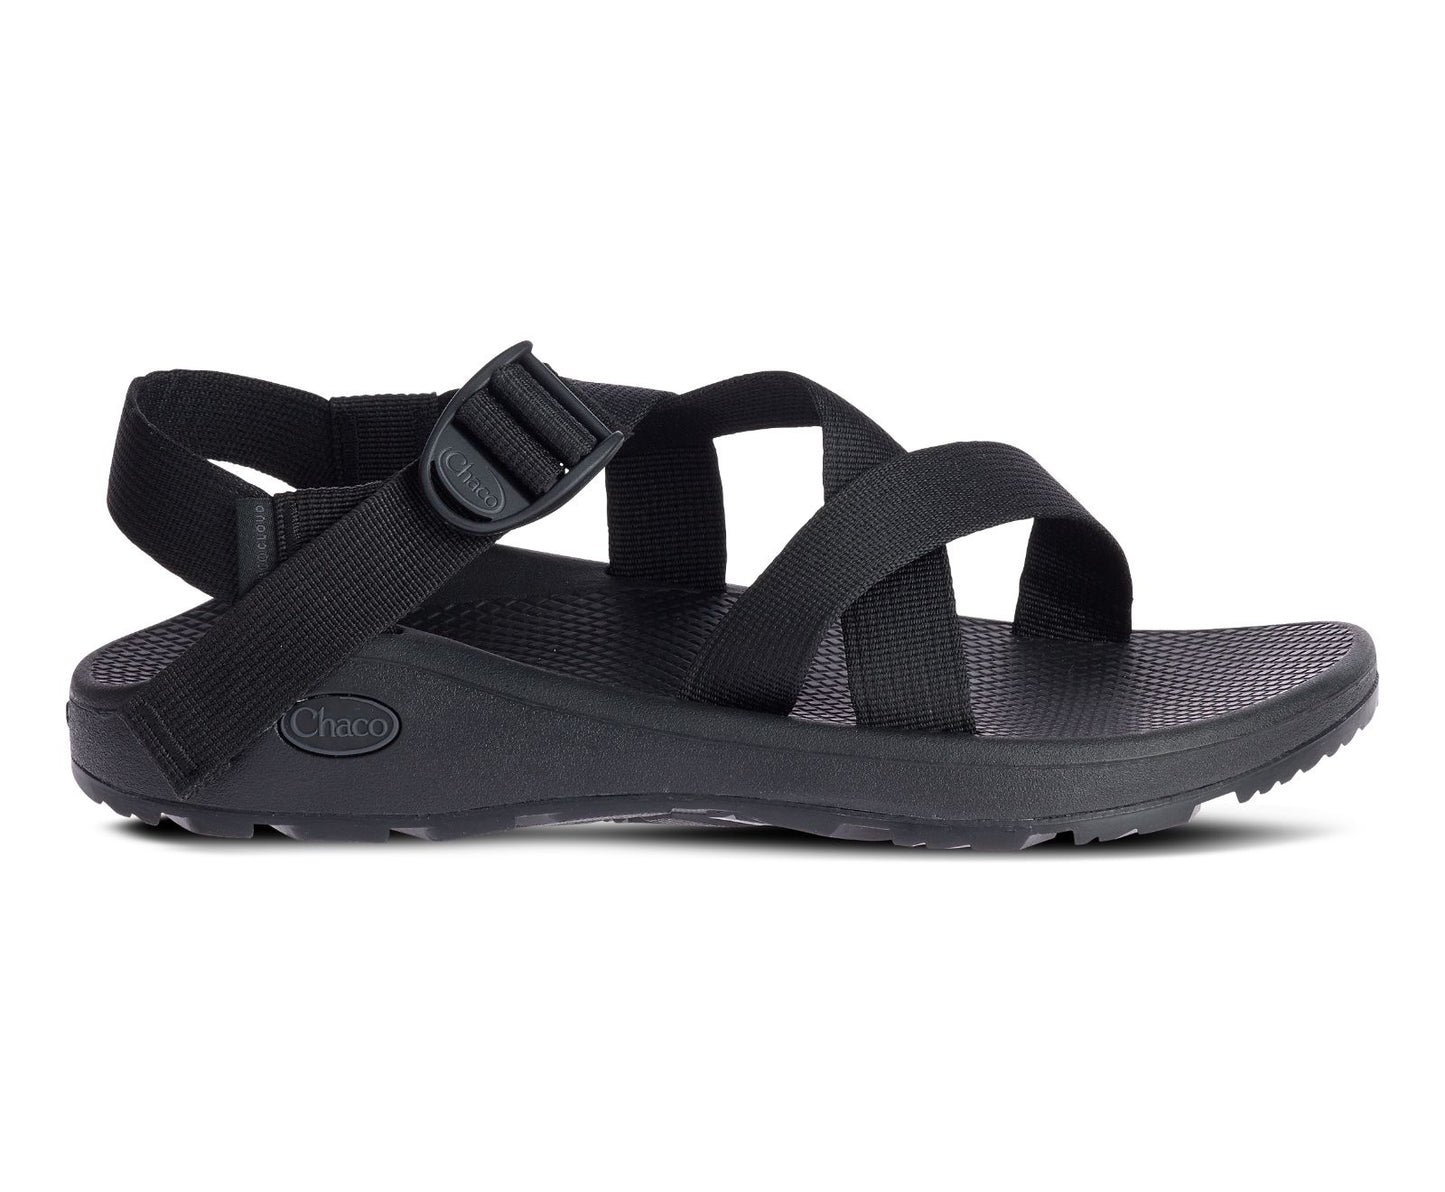 Men's ZCloud by Chaco